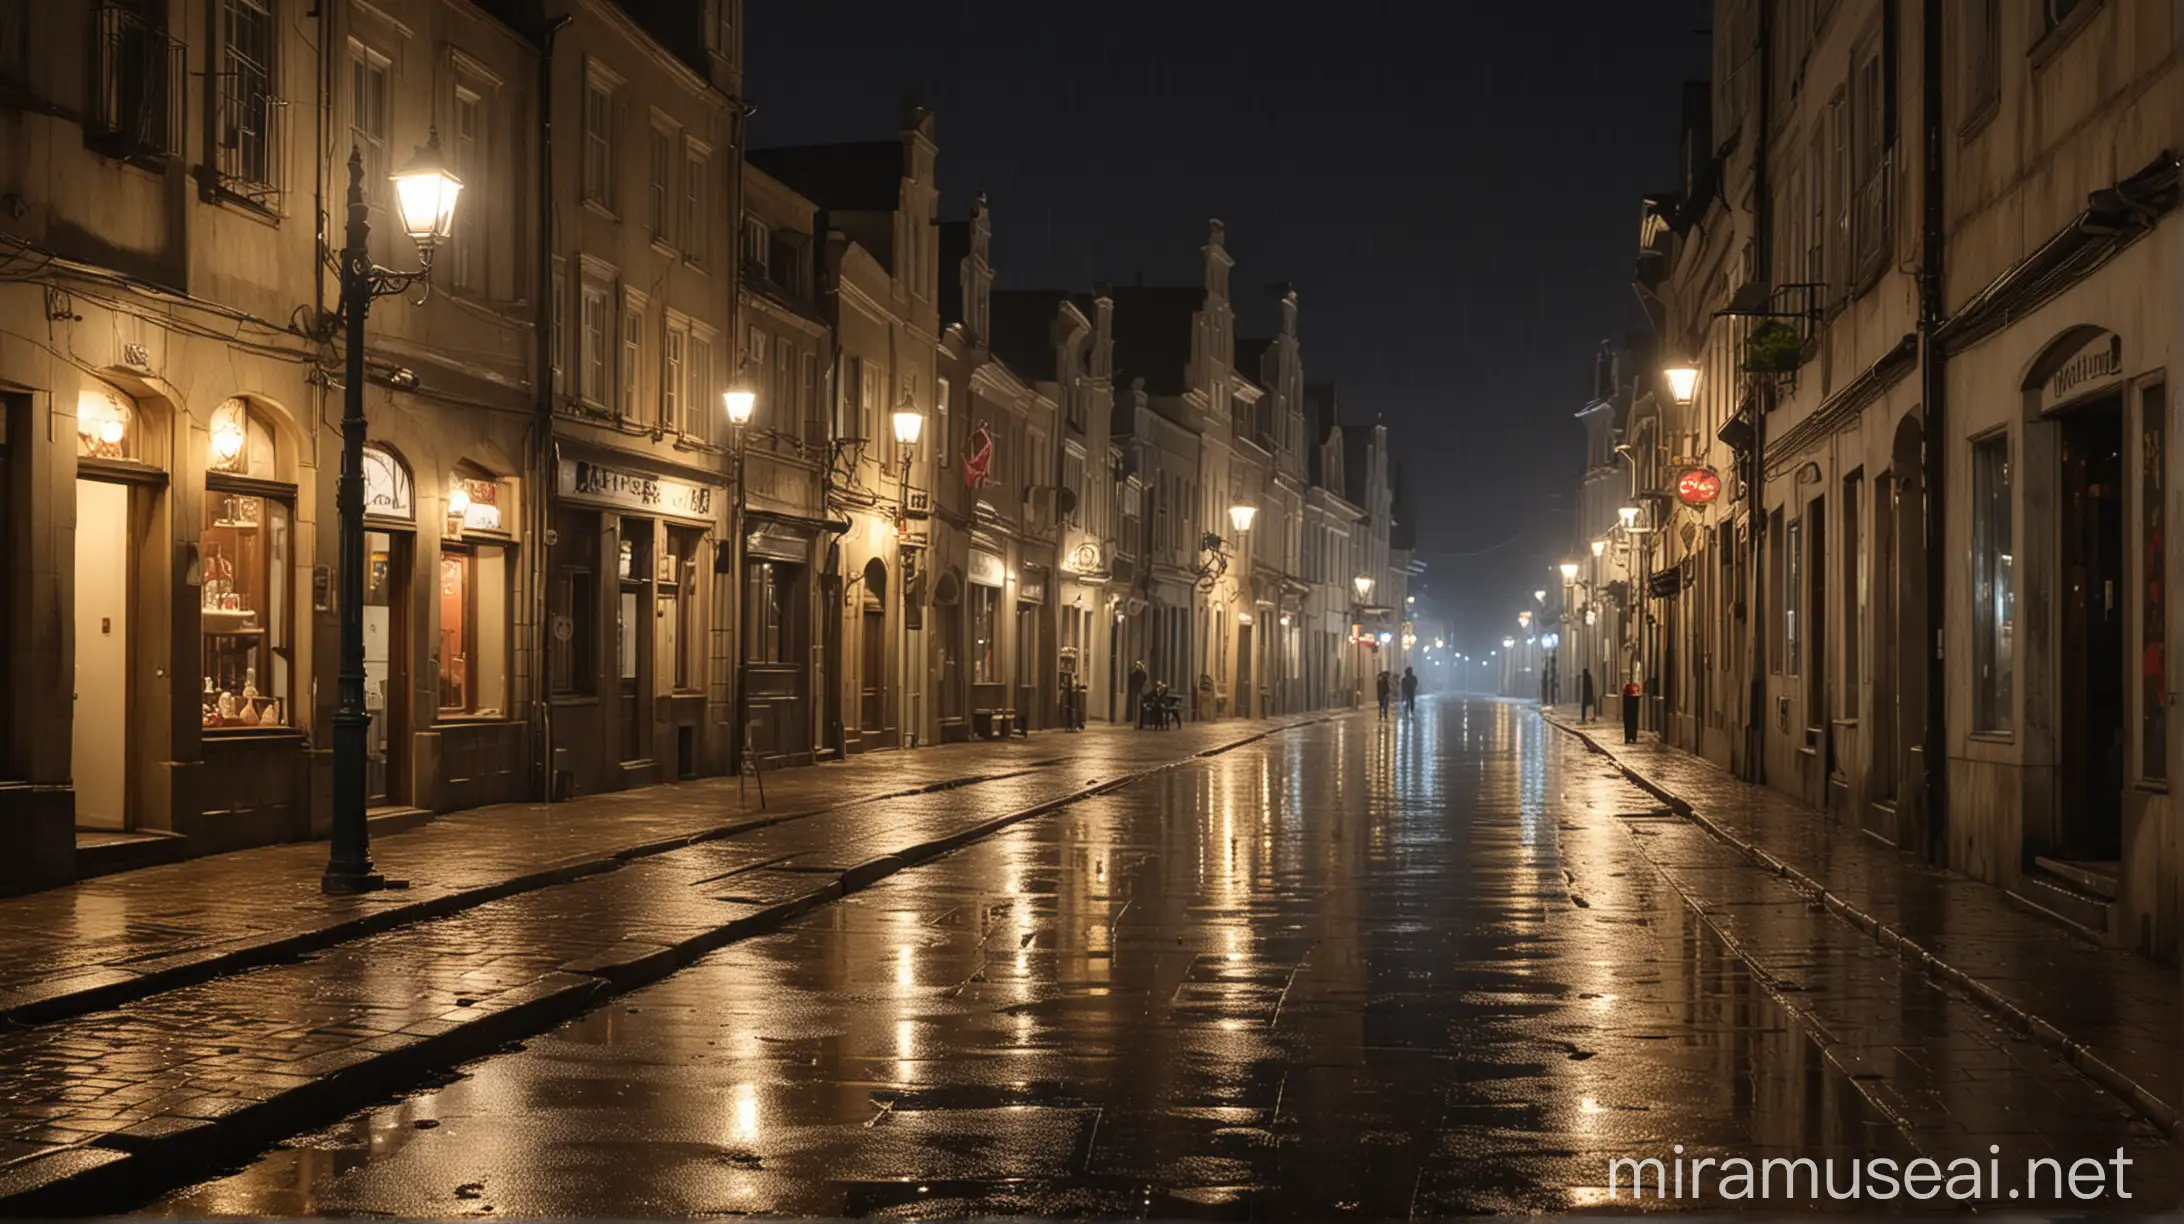 Stroll alone in the quiet night after rain in town